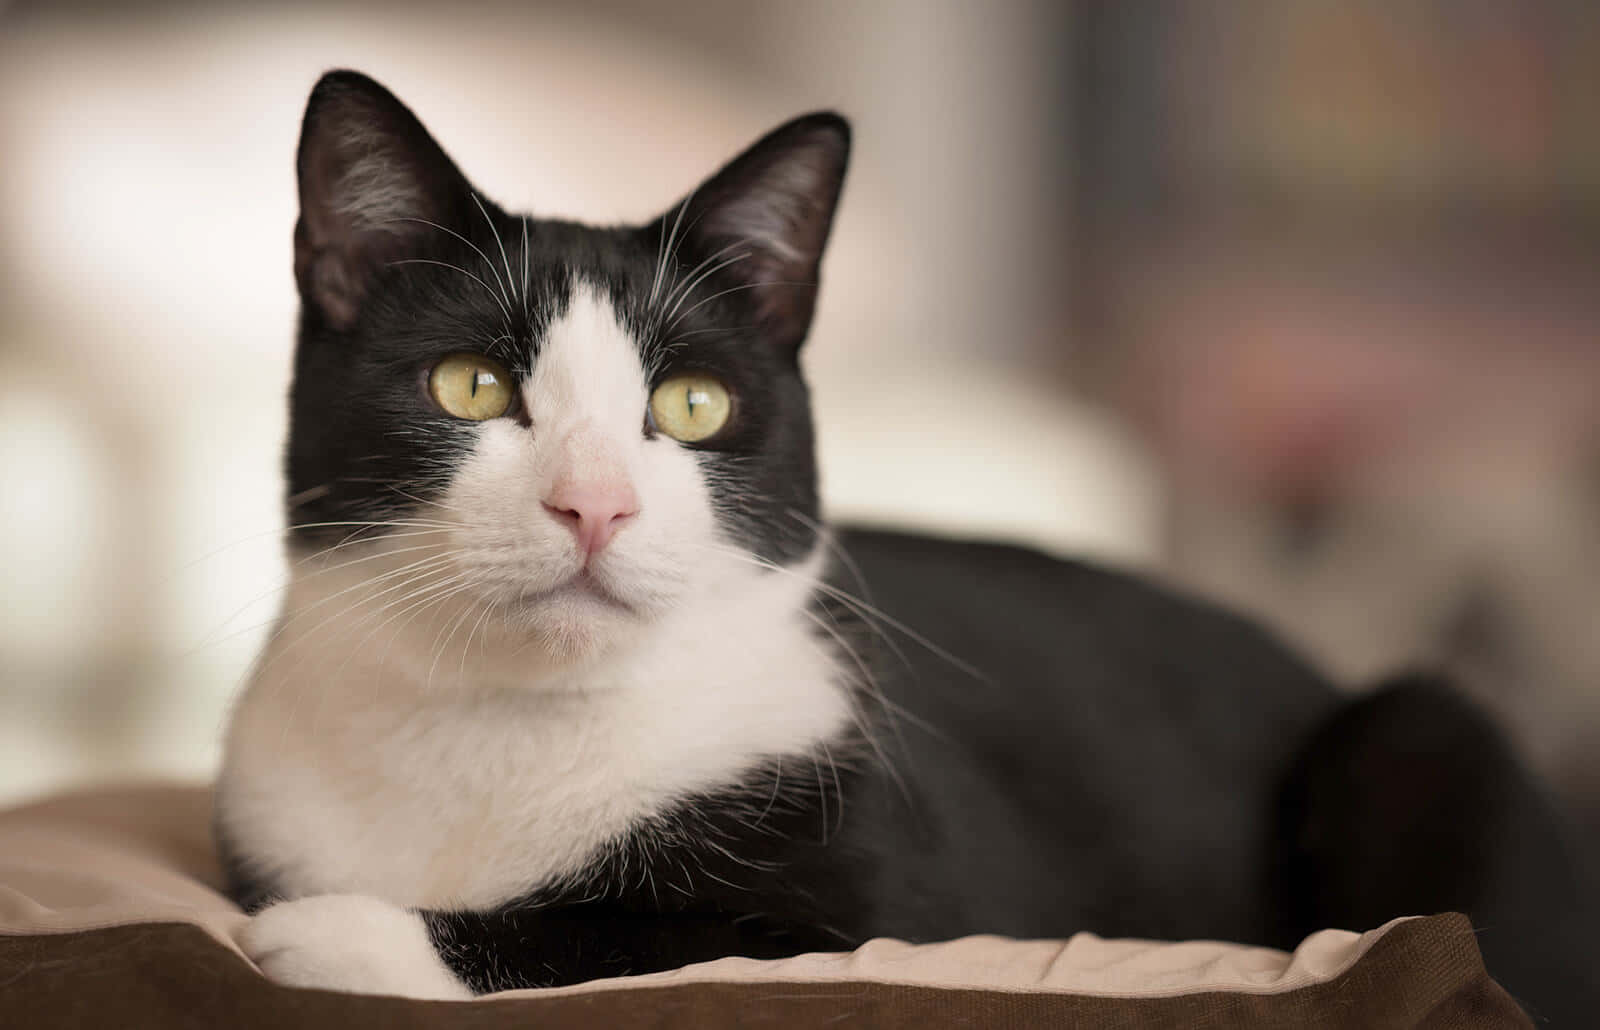 This Adorable Tuxedo Cat Is Just Waiting For You To Cuddle